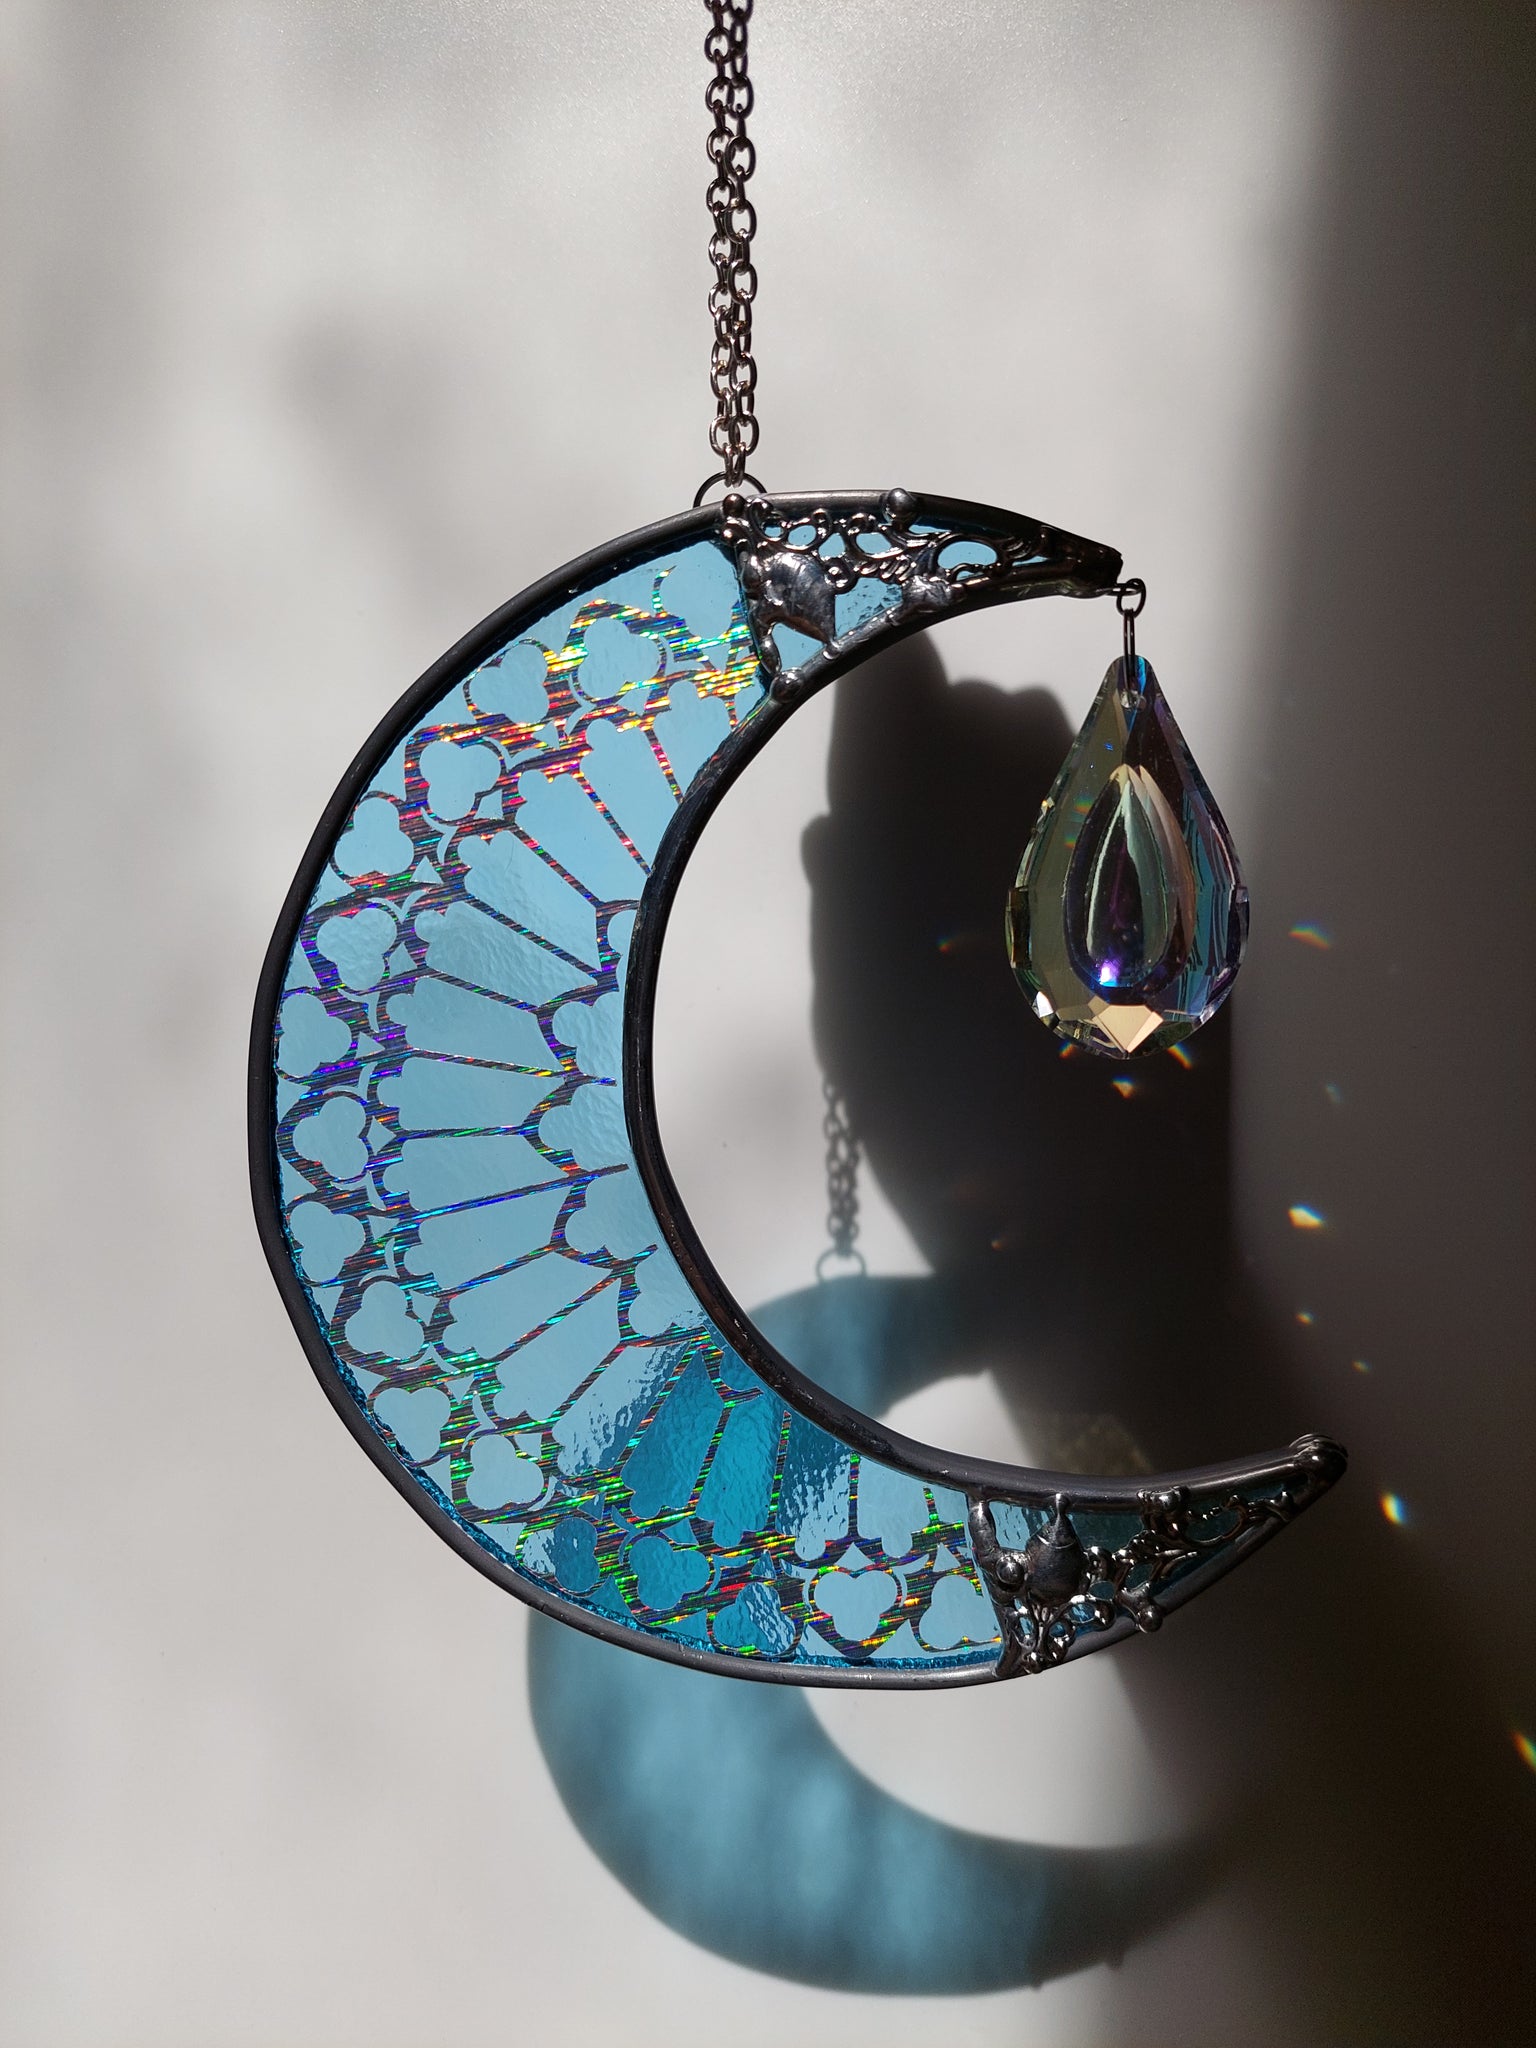 Gothic cathedral crescent moon - turquoise glass, silver decorations –  Cemetery Lane Design